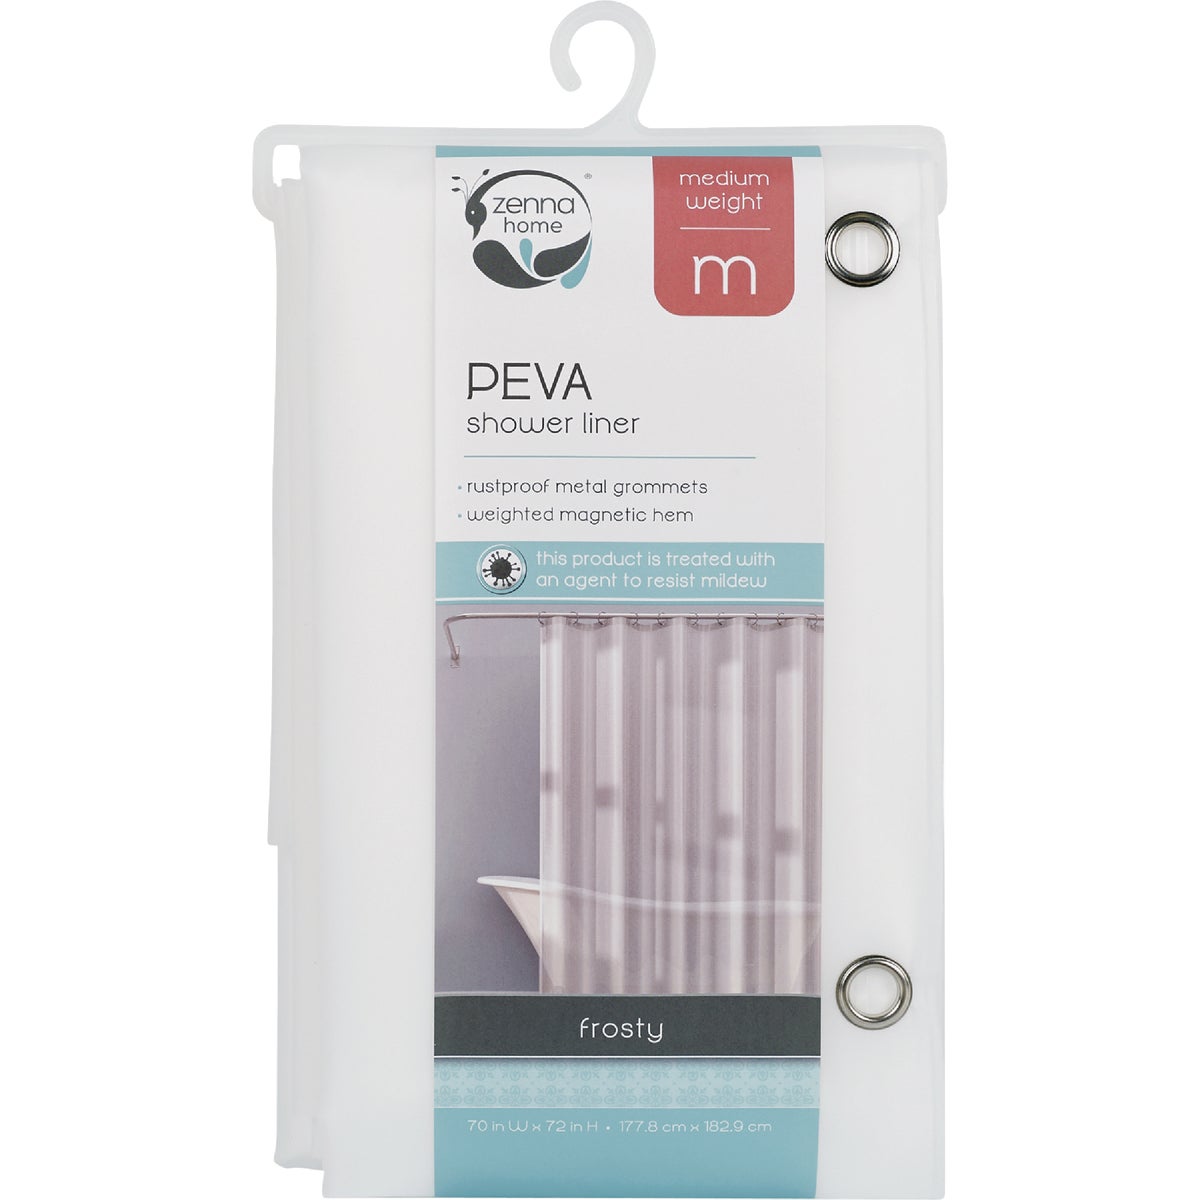 Item 616958, Medium weight PEVA shower curtain line features metal grommets for secure 